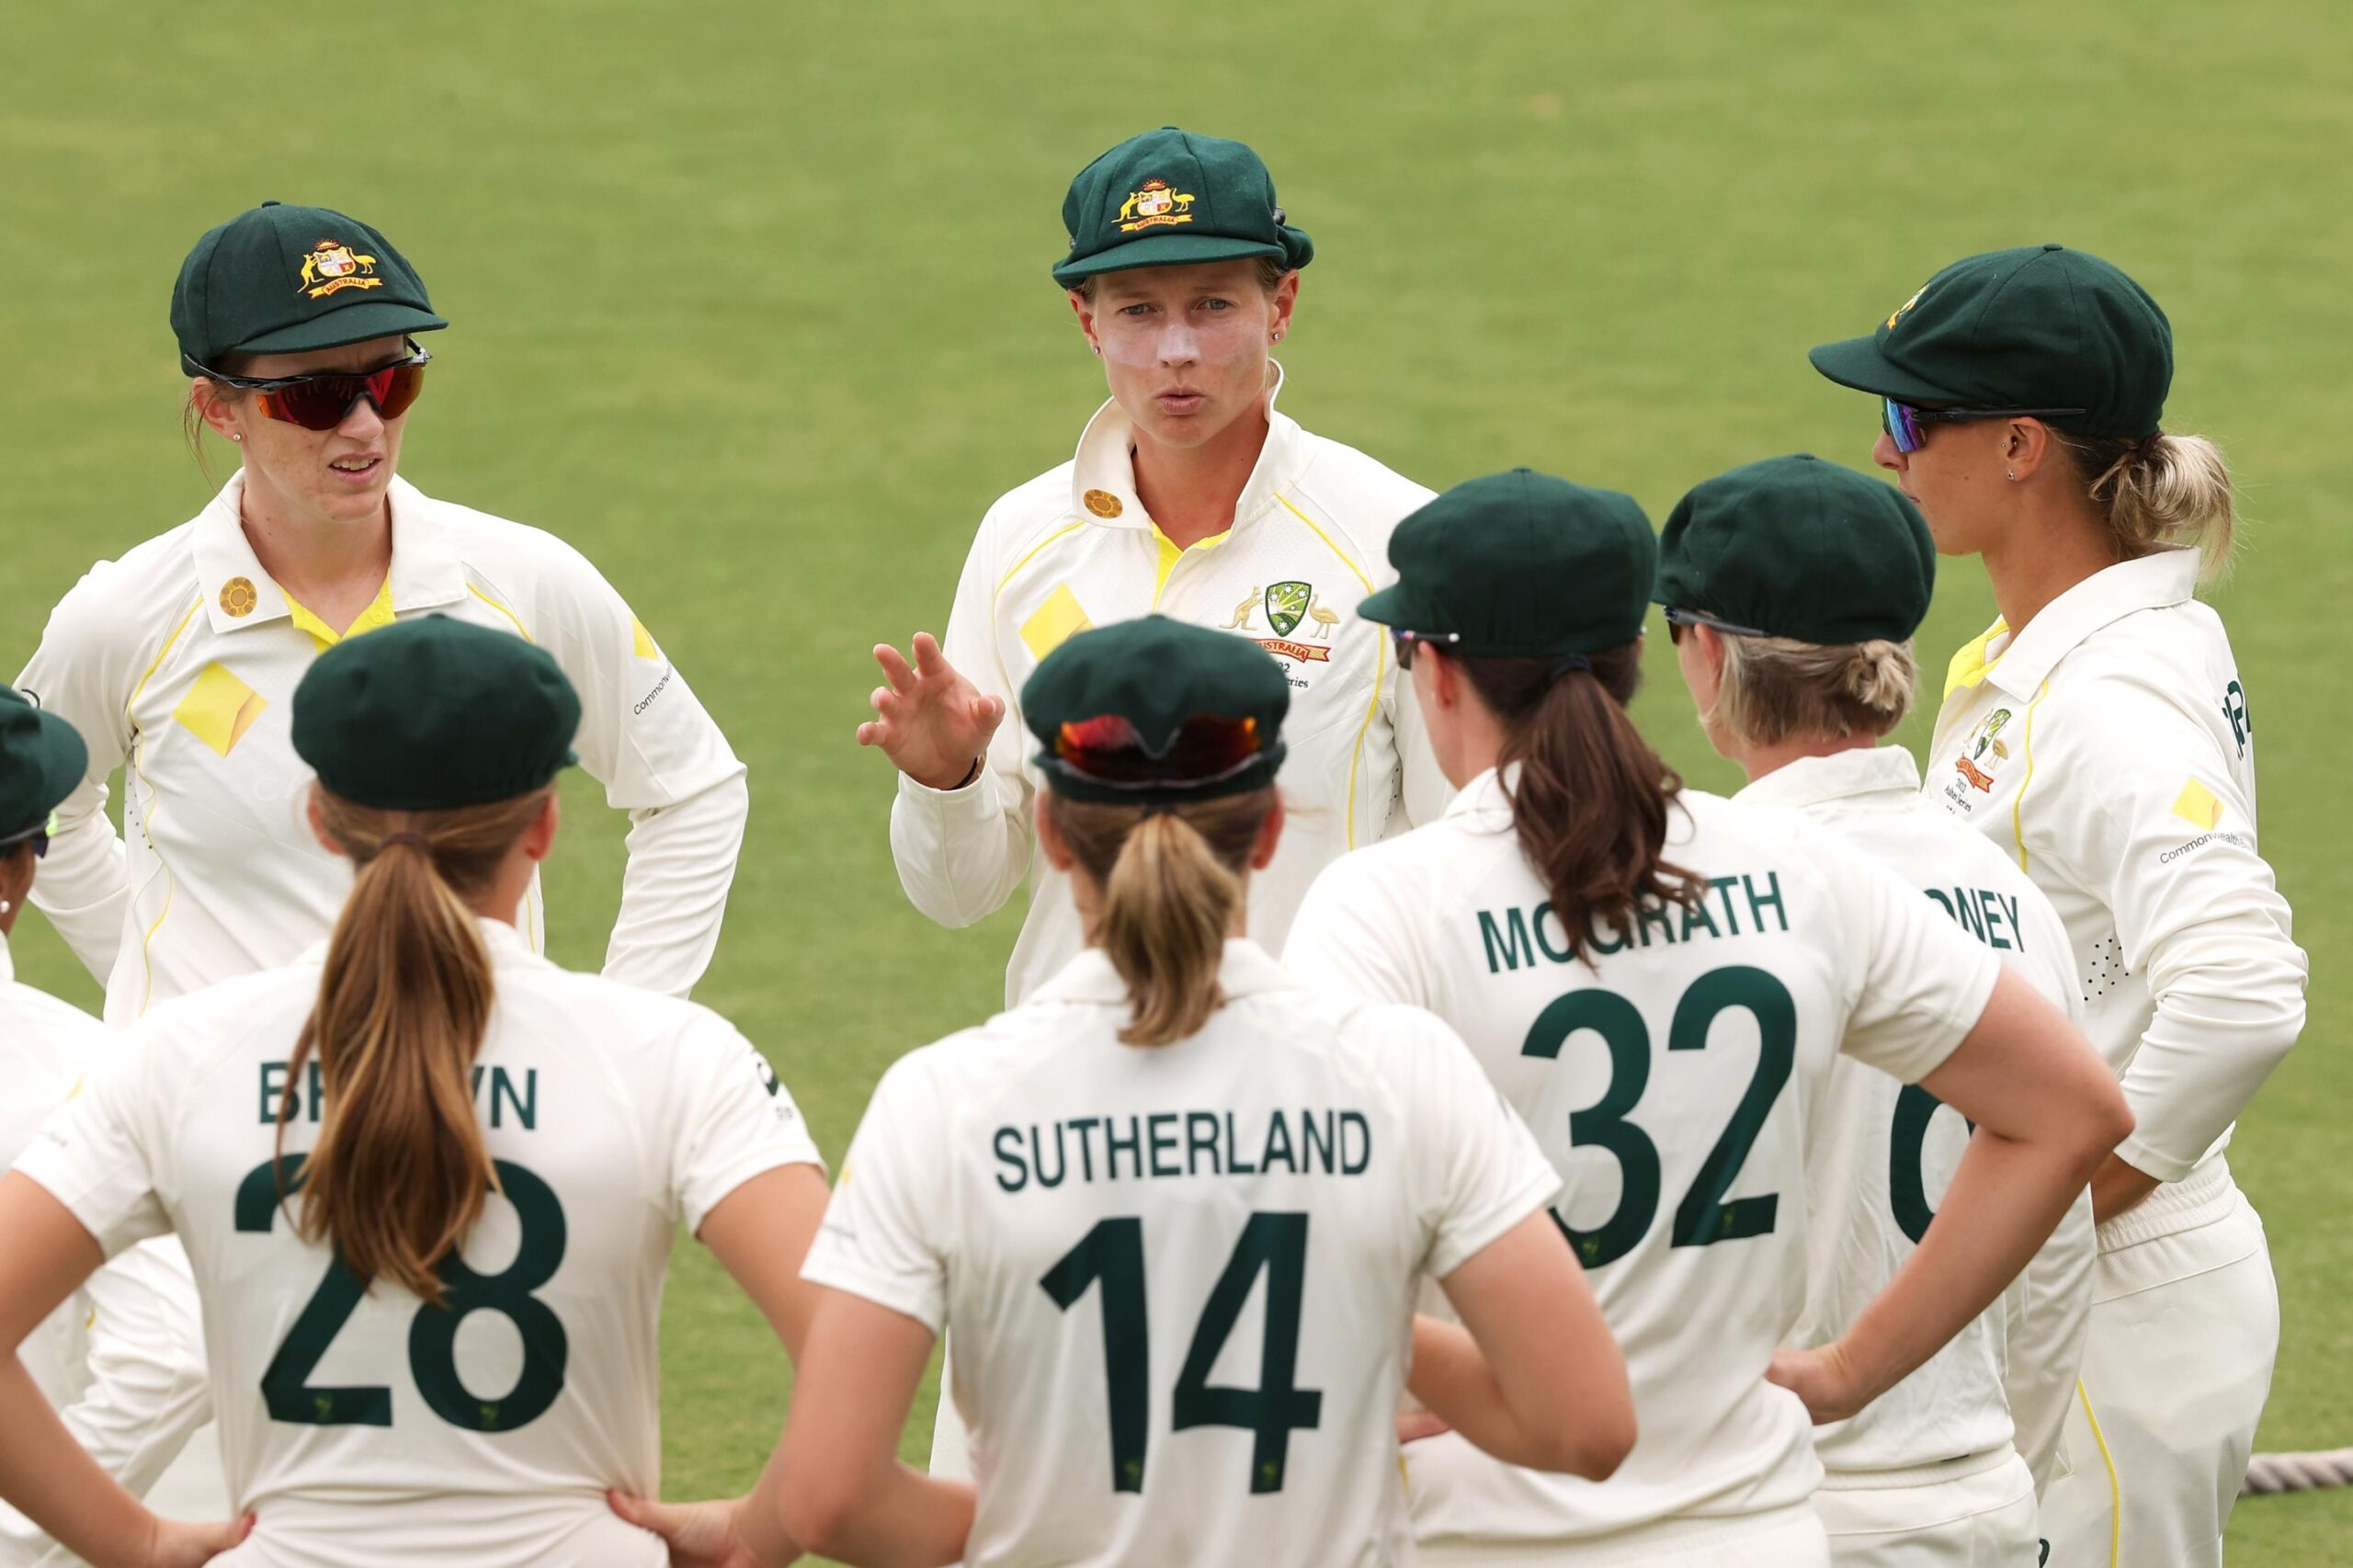  The one-off women’s Ashes Test match ends in a draw.